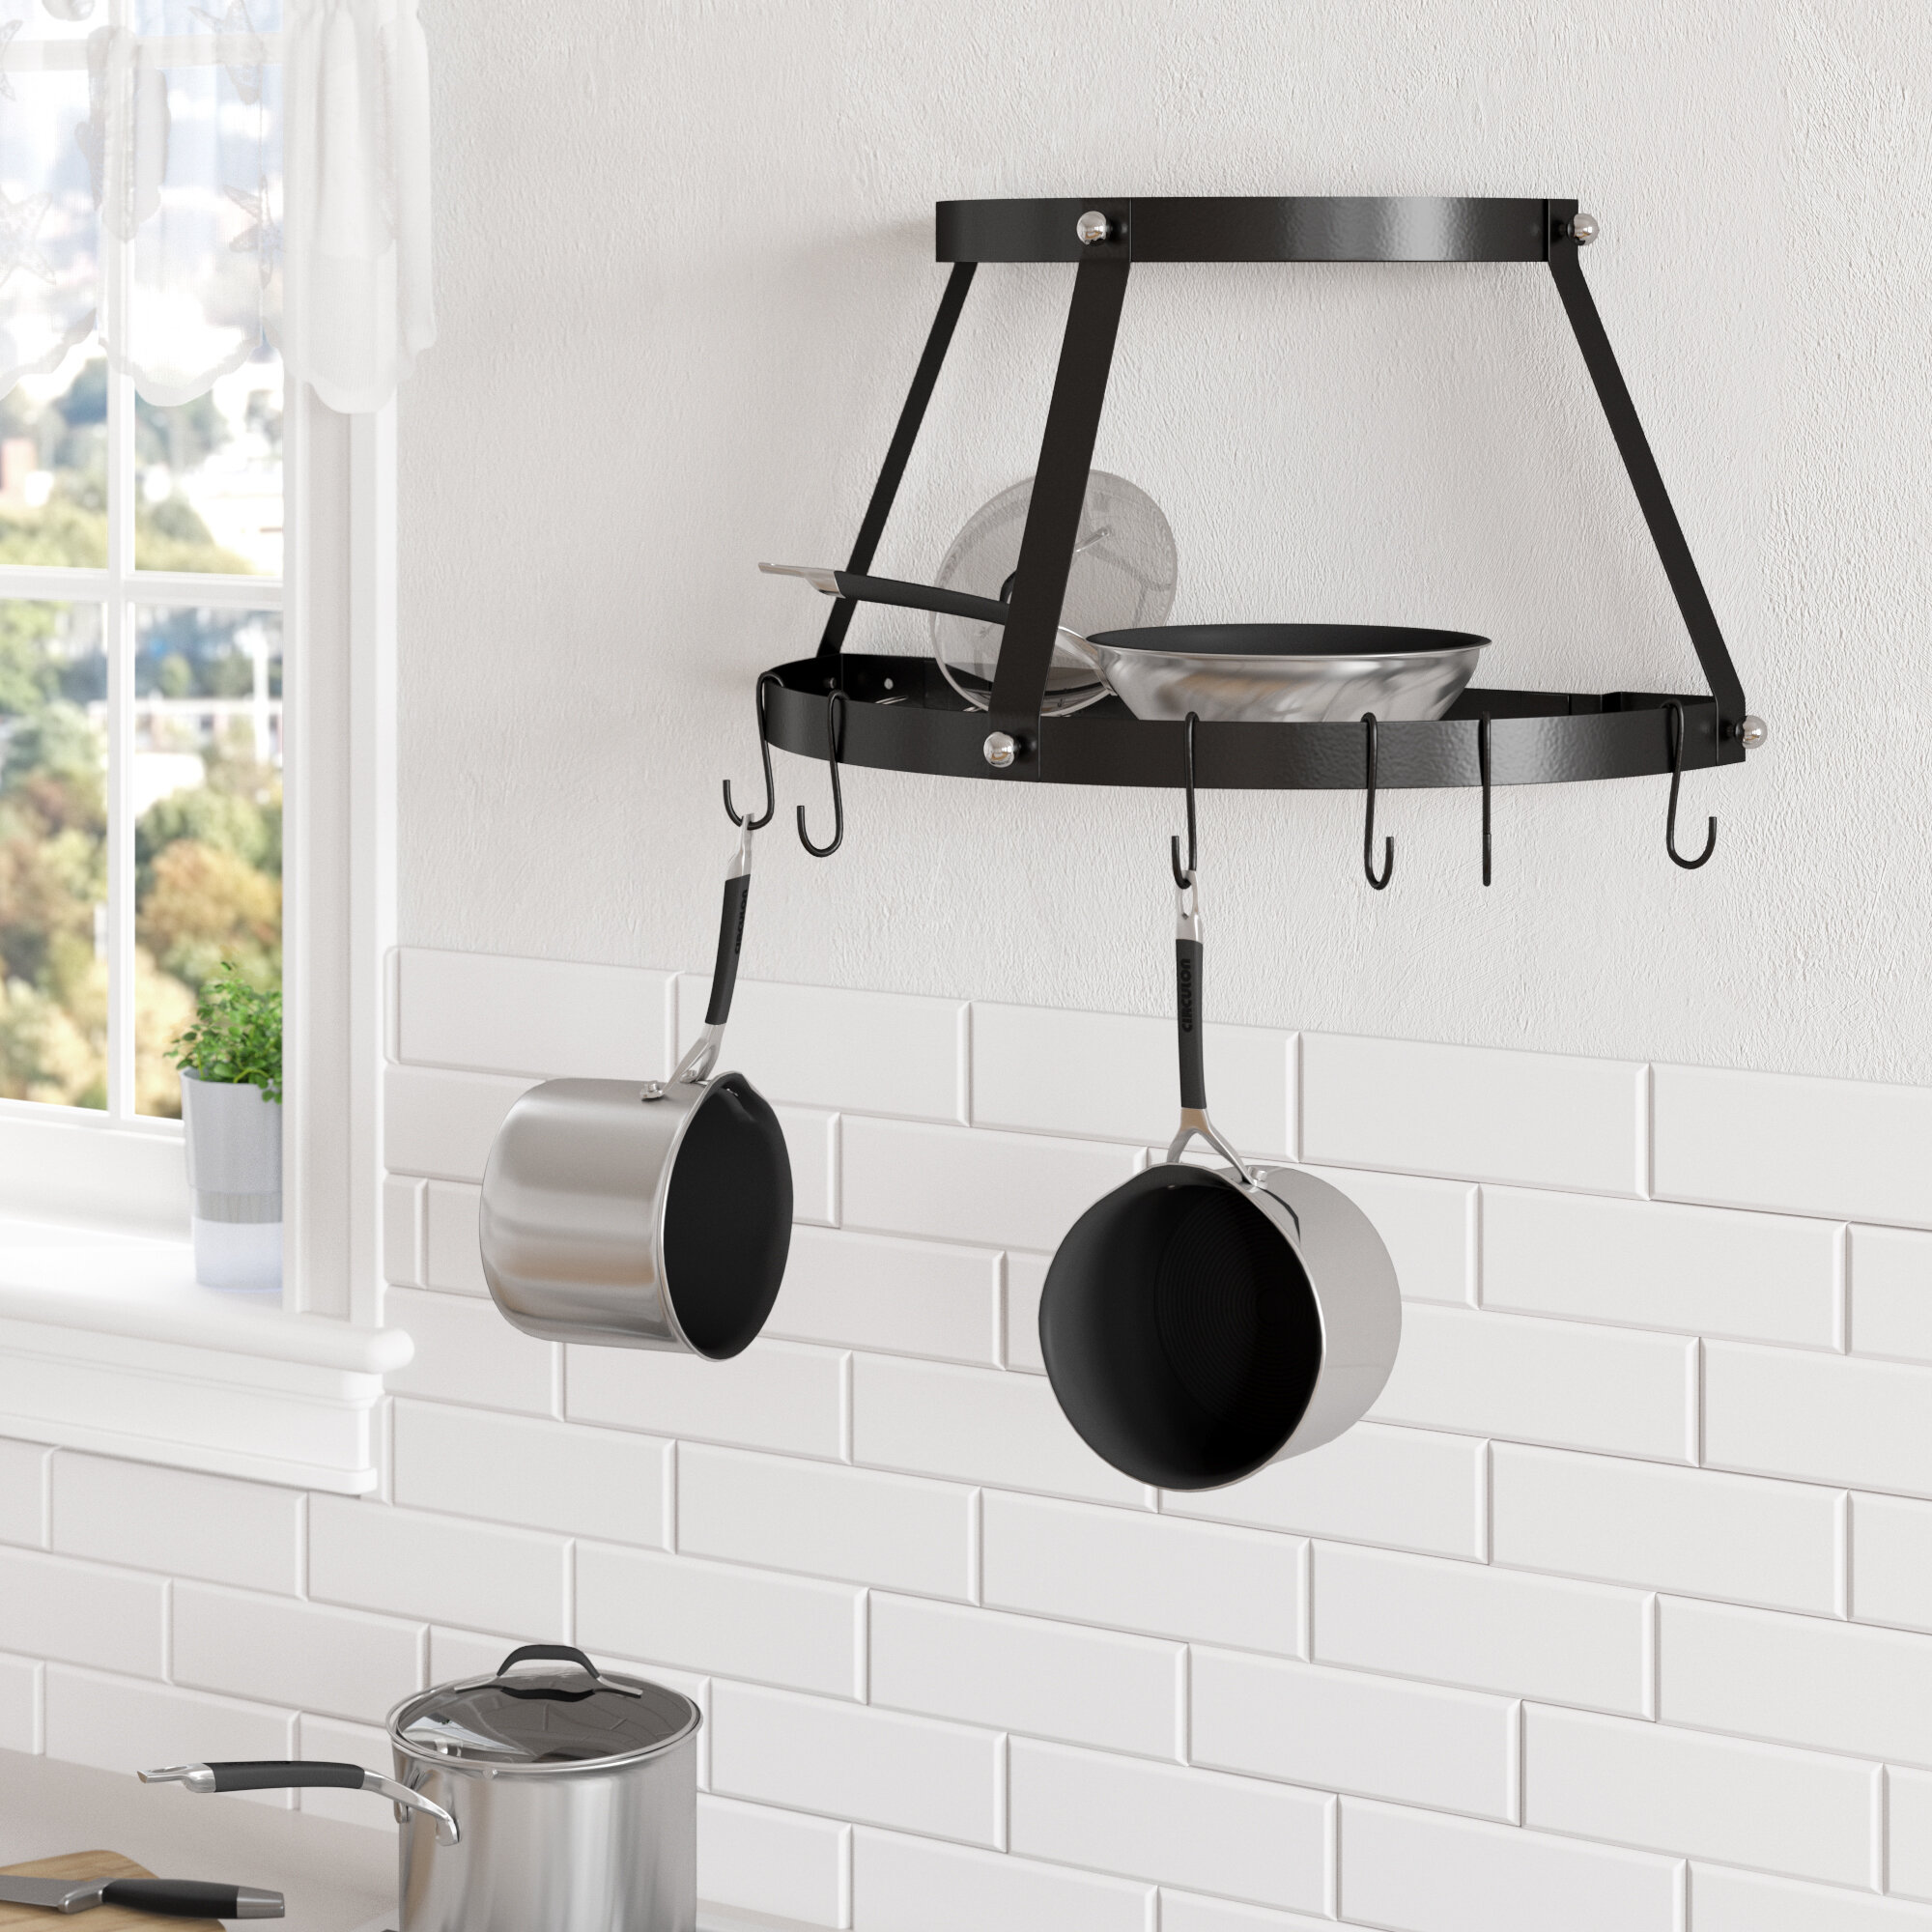 Pot and Pan Rack, Pot and Pan Hanging Organizer, Wall Mounted Shelf with 10  Hooks Hoom Decor for Kitchen, Black Halloween Home Decorations 